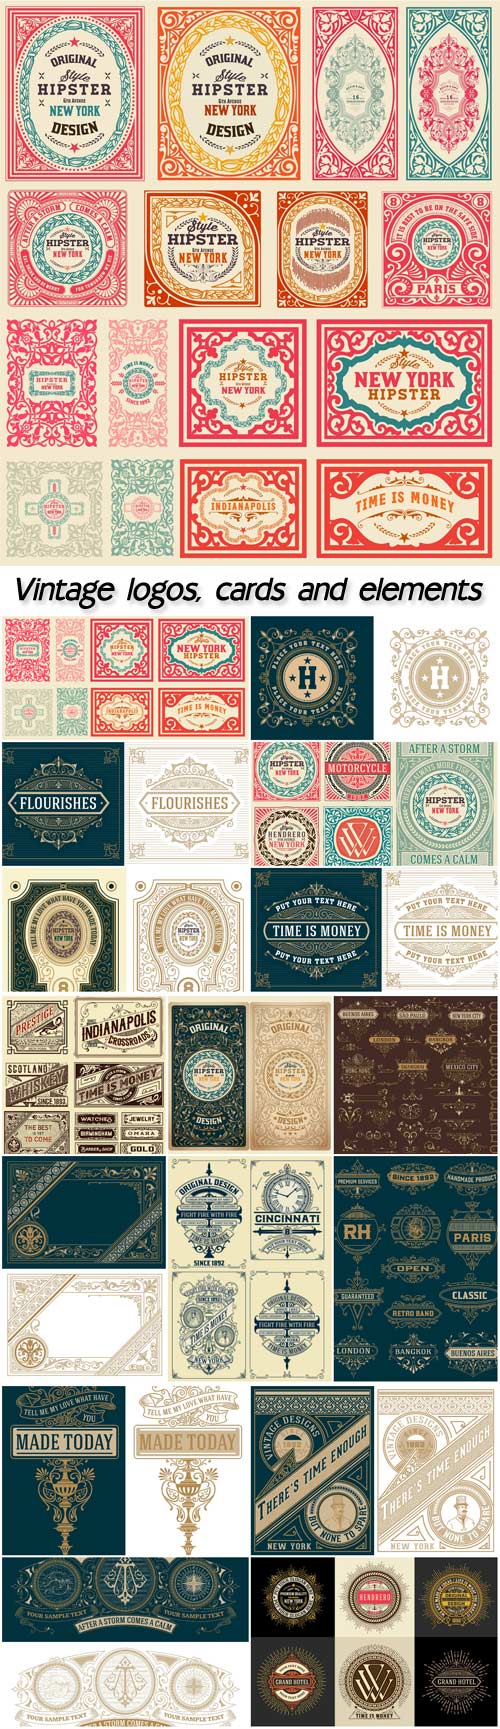 Vintage logos, cards and elements, floral ornaments, vector templates